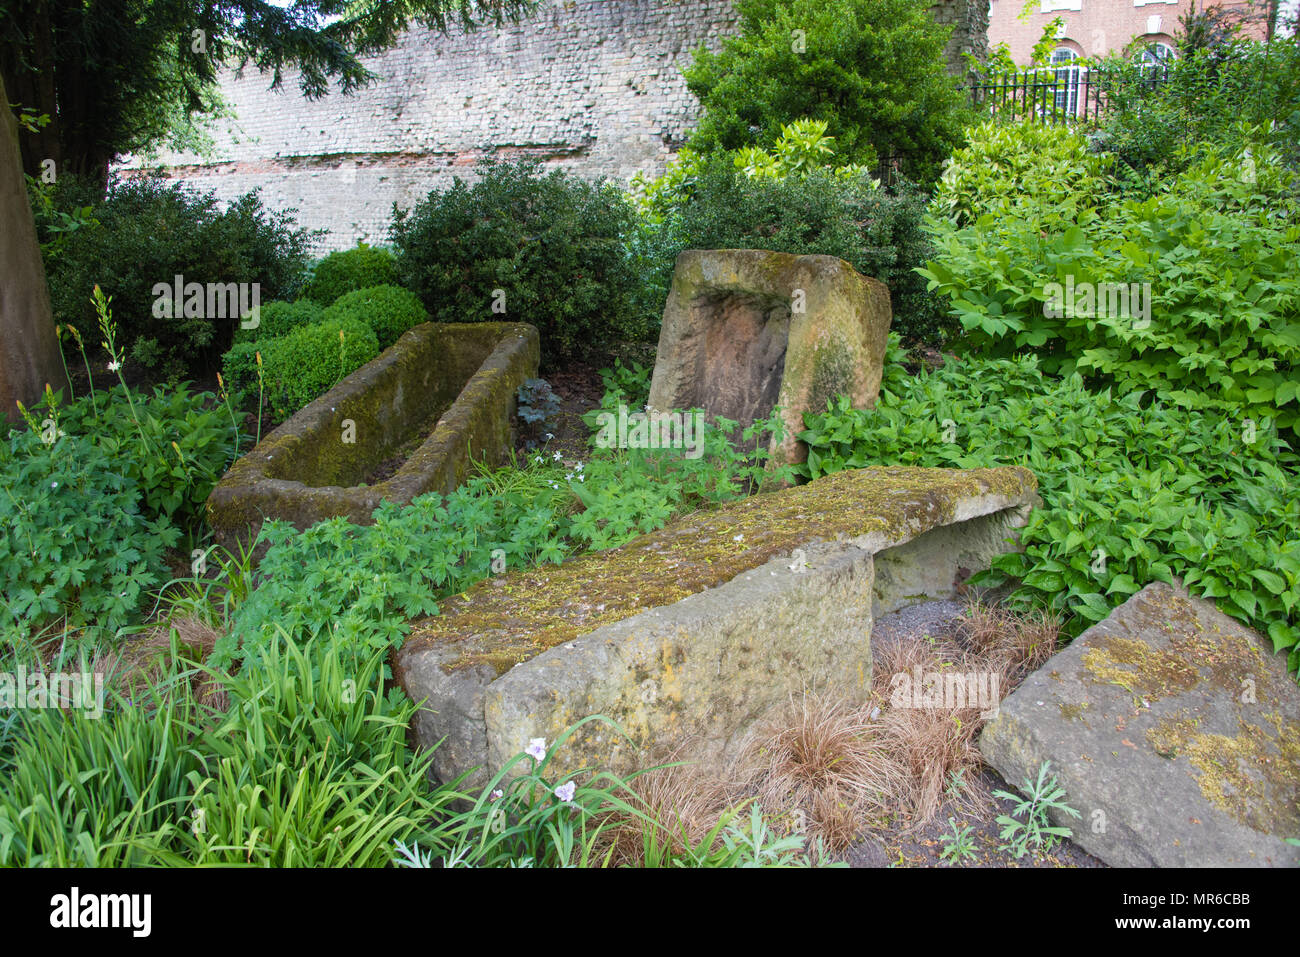 There are a lots of old Roman remains to be found in York, England including these ancient stone coffins in the City Centre Museum Gardens. Stock Photo